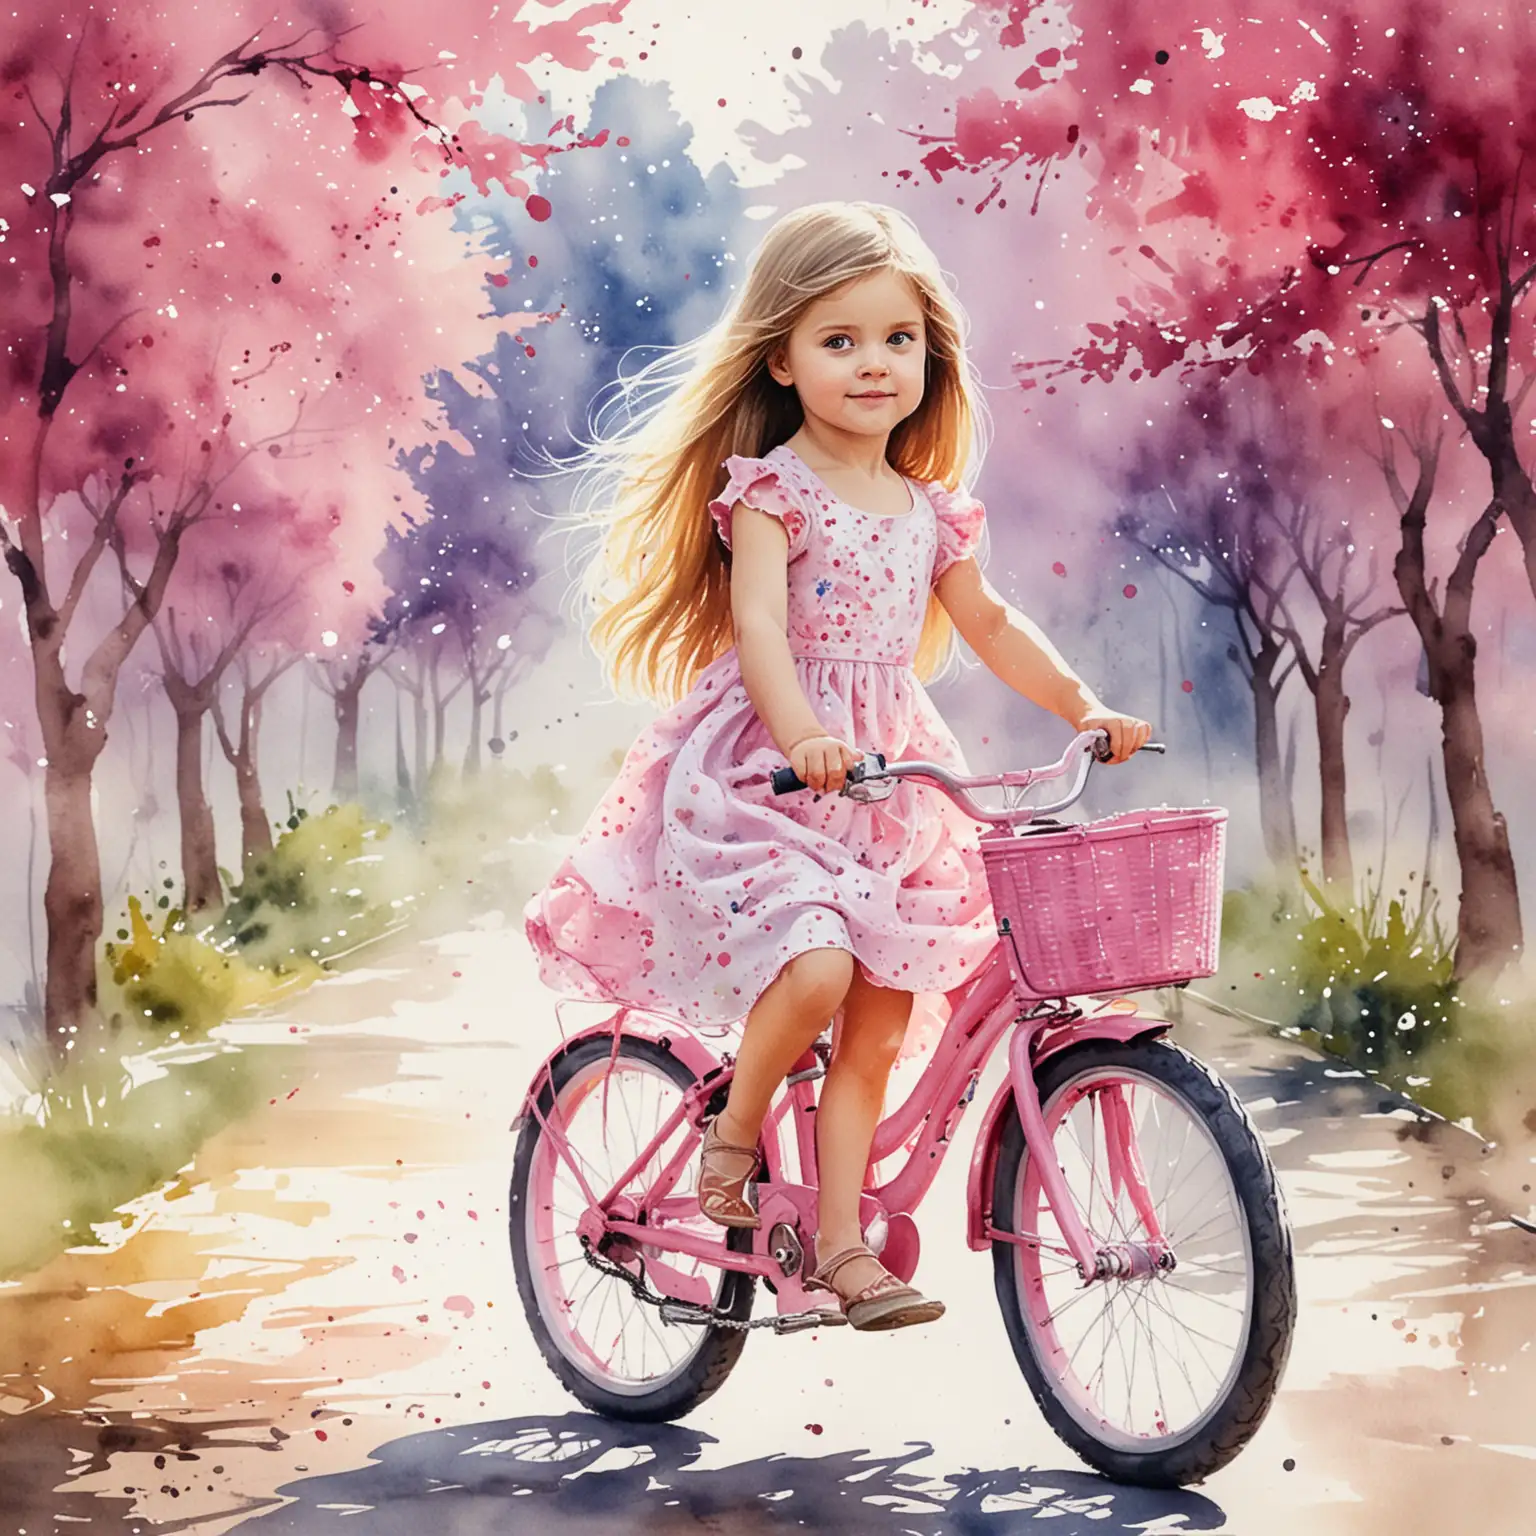 little girl with long hair and a dress riding a pink bike. Watercolor style and splash background